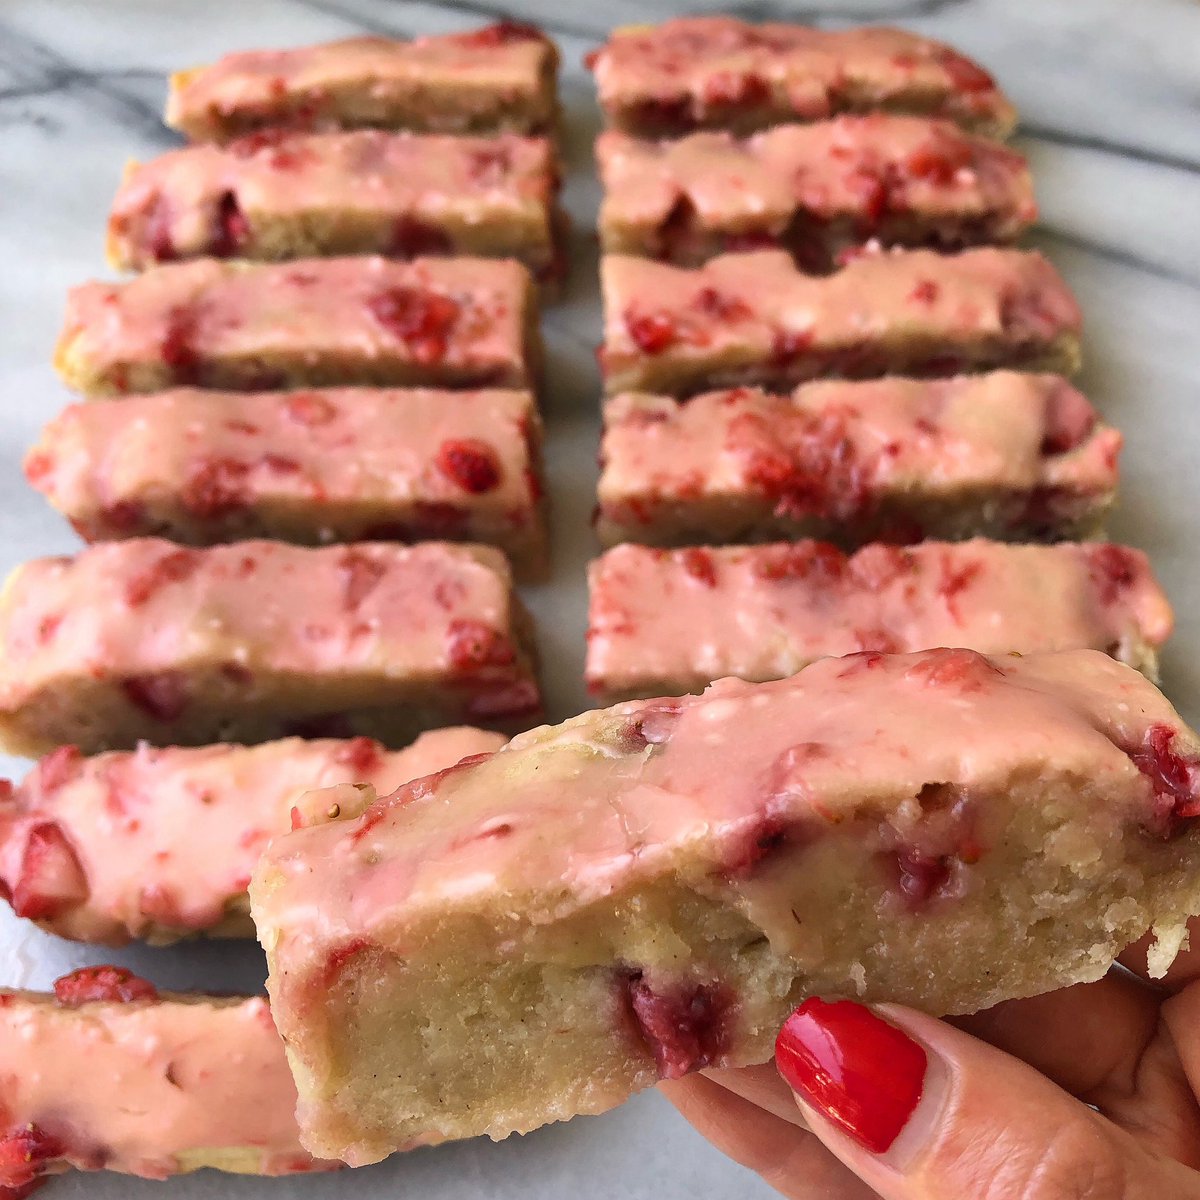 These #GlutenFree strawberry cake bars are BERRY delicious‼️ The 🎂 is so moist, and the 🍓 glaze makes it even better😍 Perfect dessert to make for #ValentinesDay 💋 Recipe at glutenfreefollowme.com/recipe/strawbe… ❤️#glutenfreevalentinesday #valentinesdaydessert #glutenfreedessert